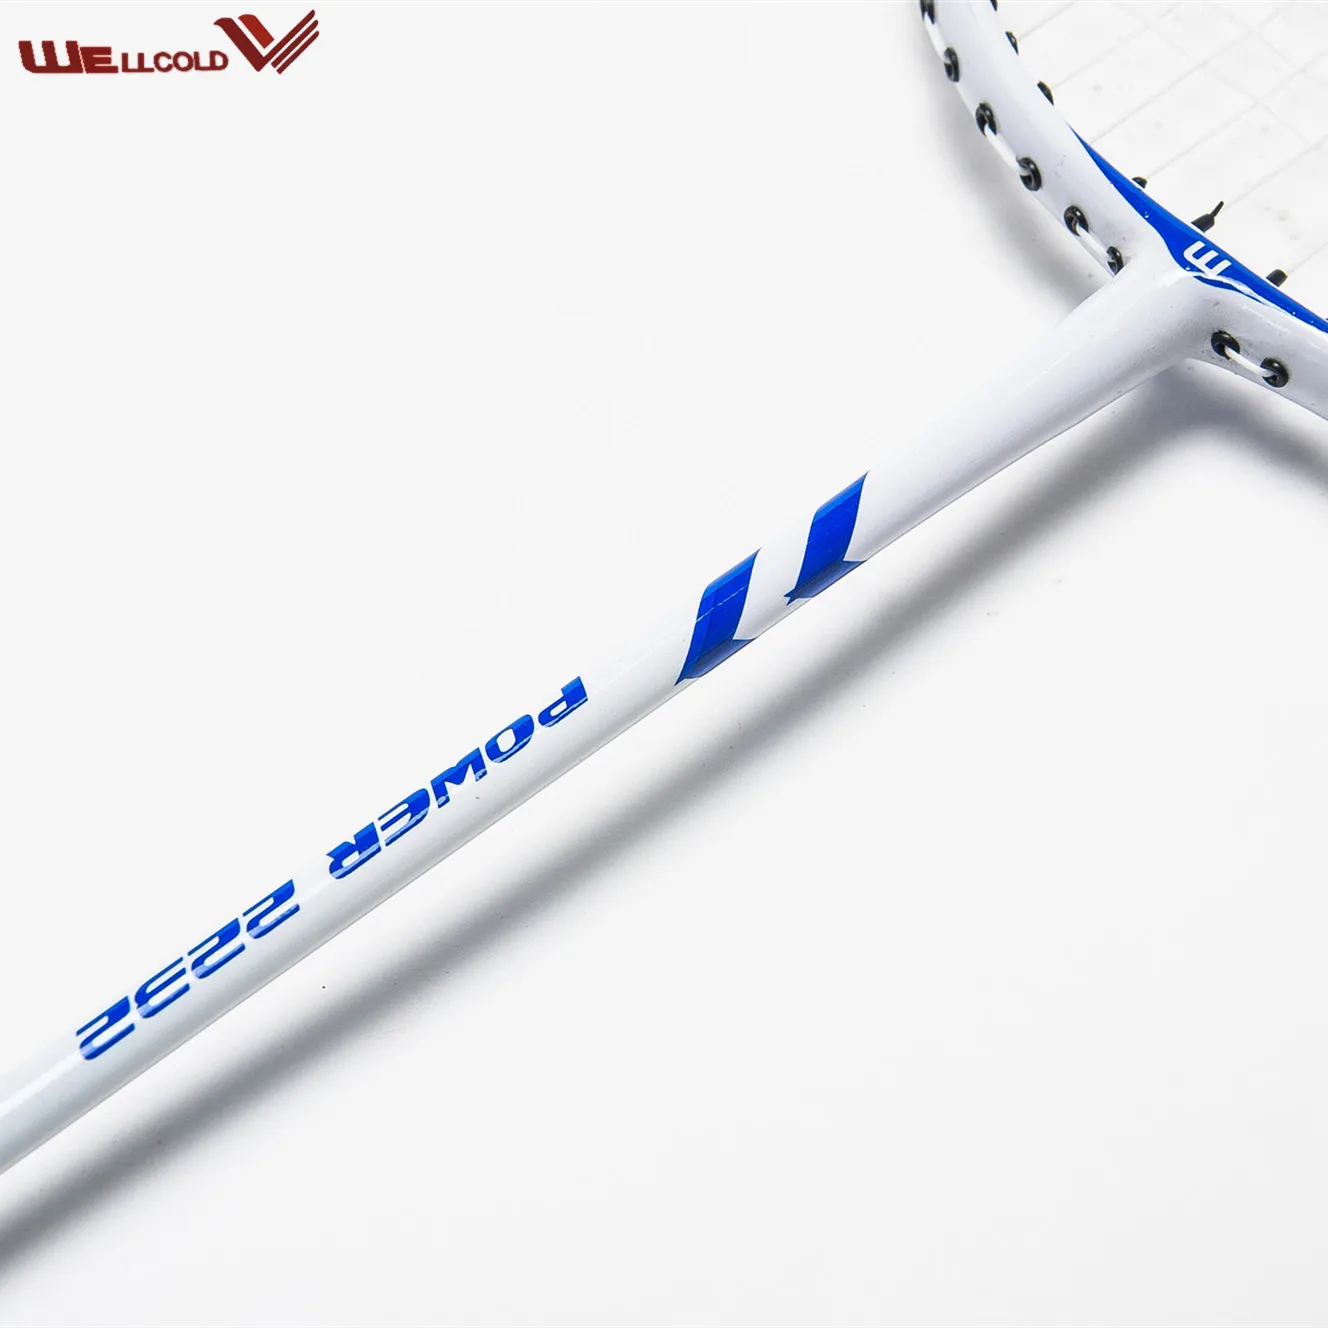 2018 high quality wellcold  low price aluminum badminton racket set wholesale with bag